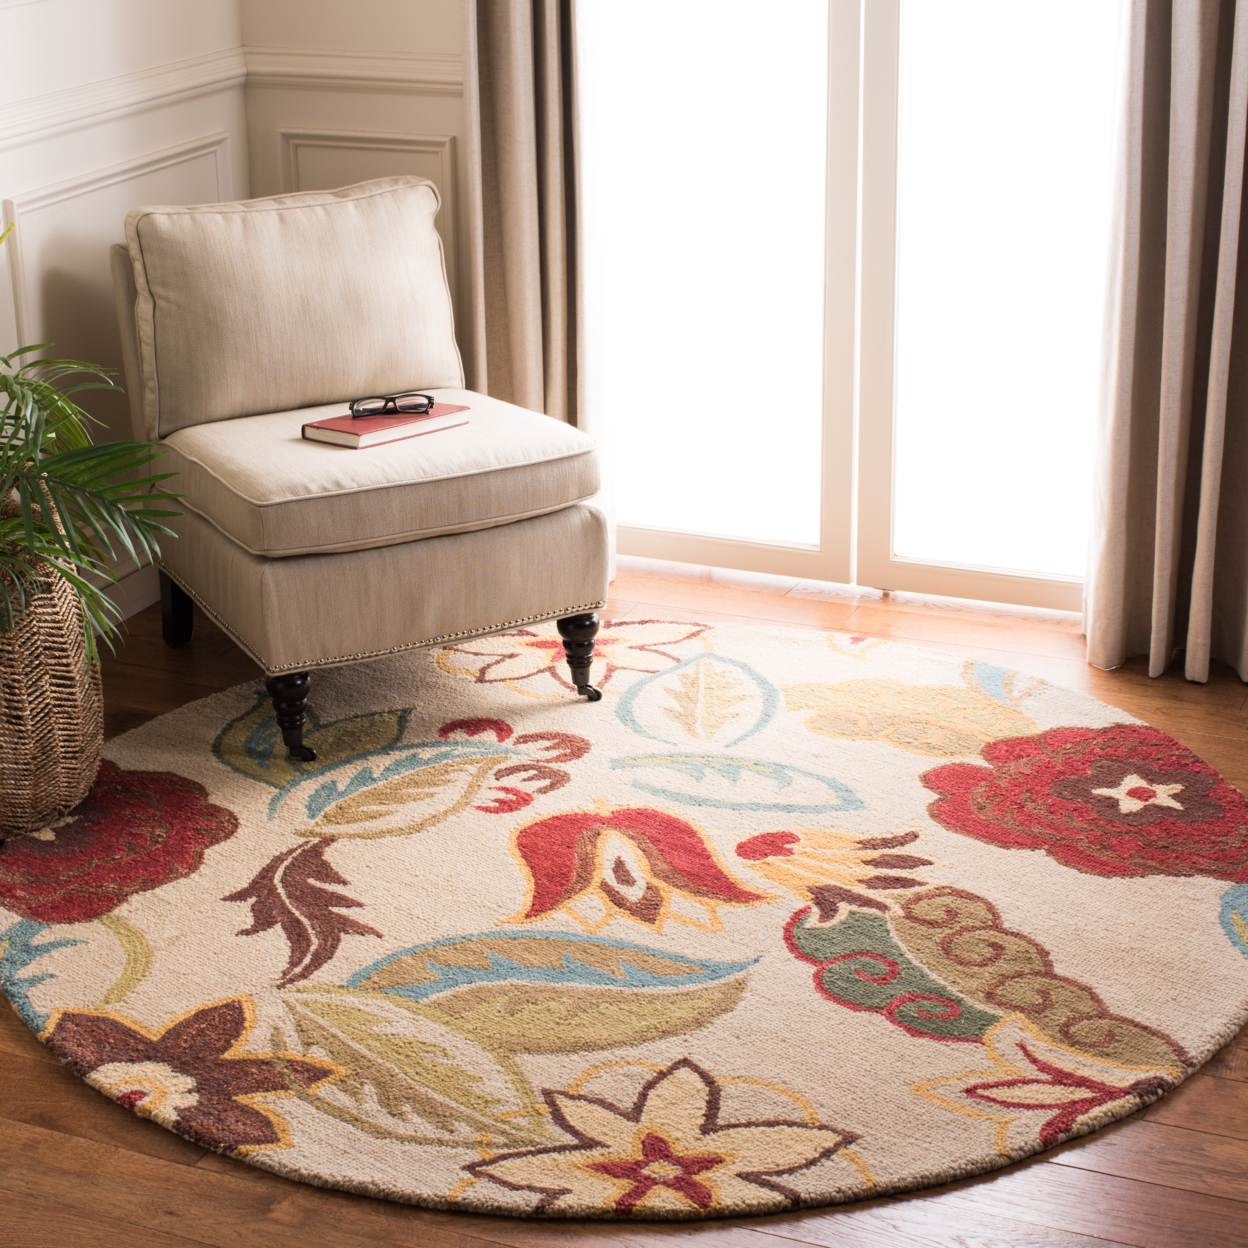 SAFAVIEH Blossom BLM671A Hand-hooked Beige / Multi Rug - 6' Square